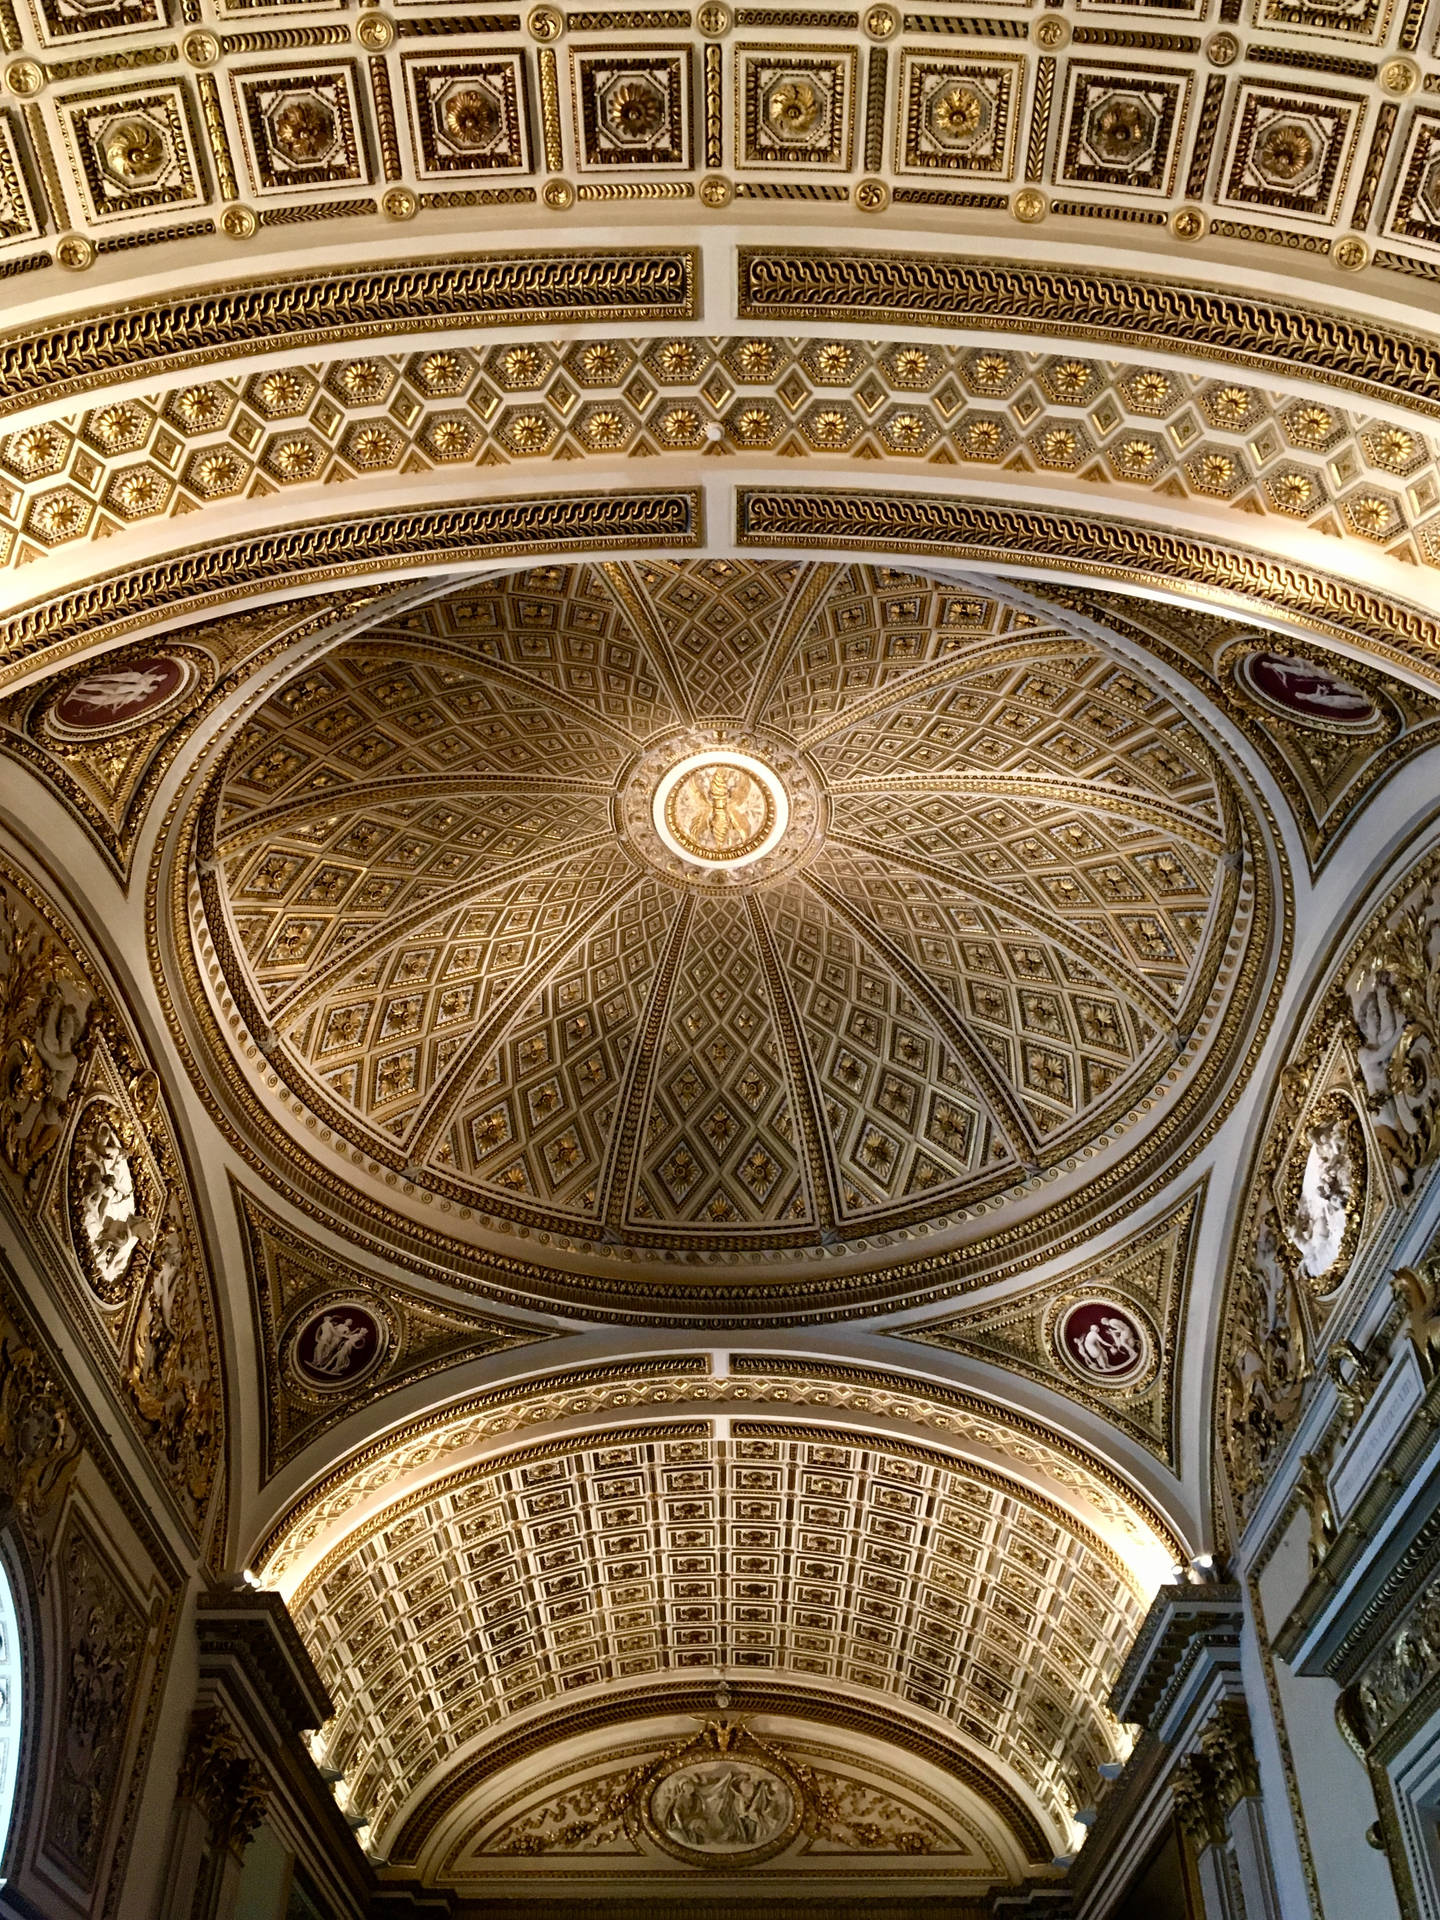 Gold Ceiling At Uffizi Gallery Wallpaper